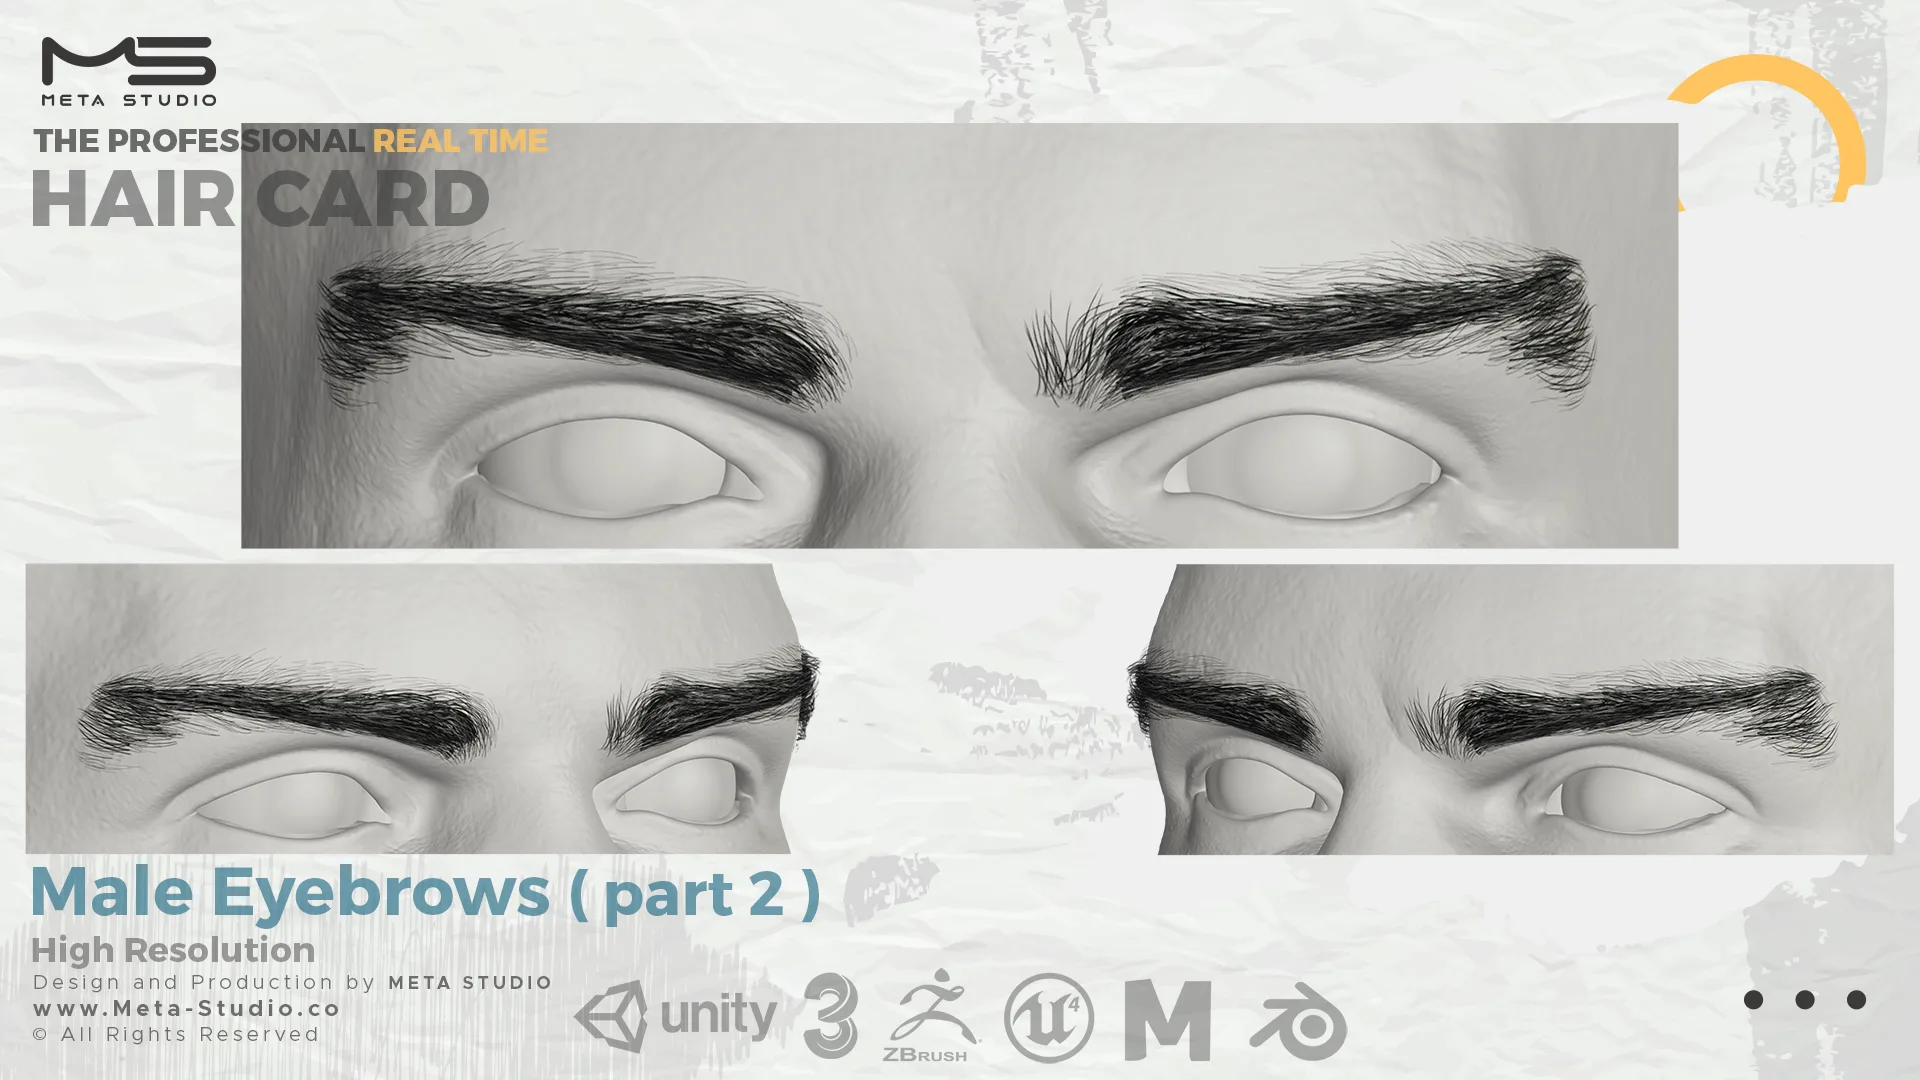 Male Eyebrows Part 2 - Professional Realtime Hair card